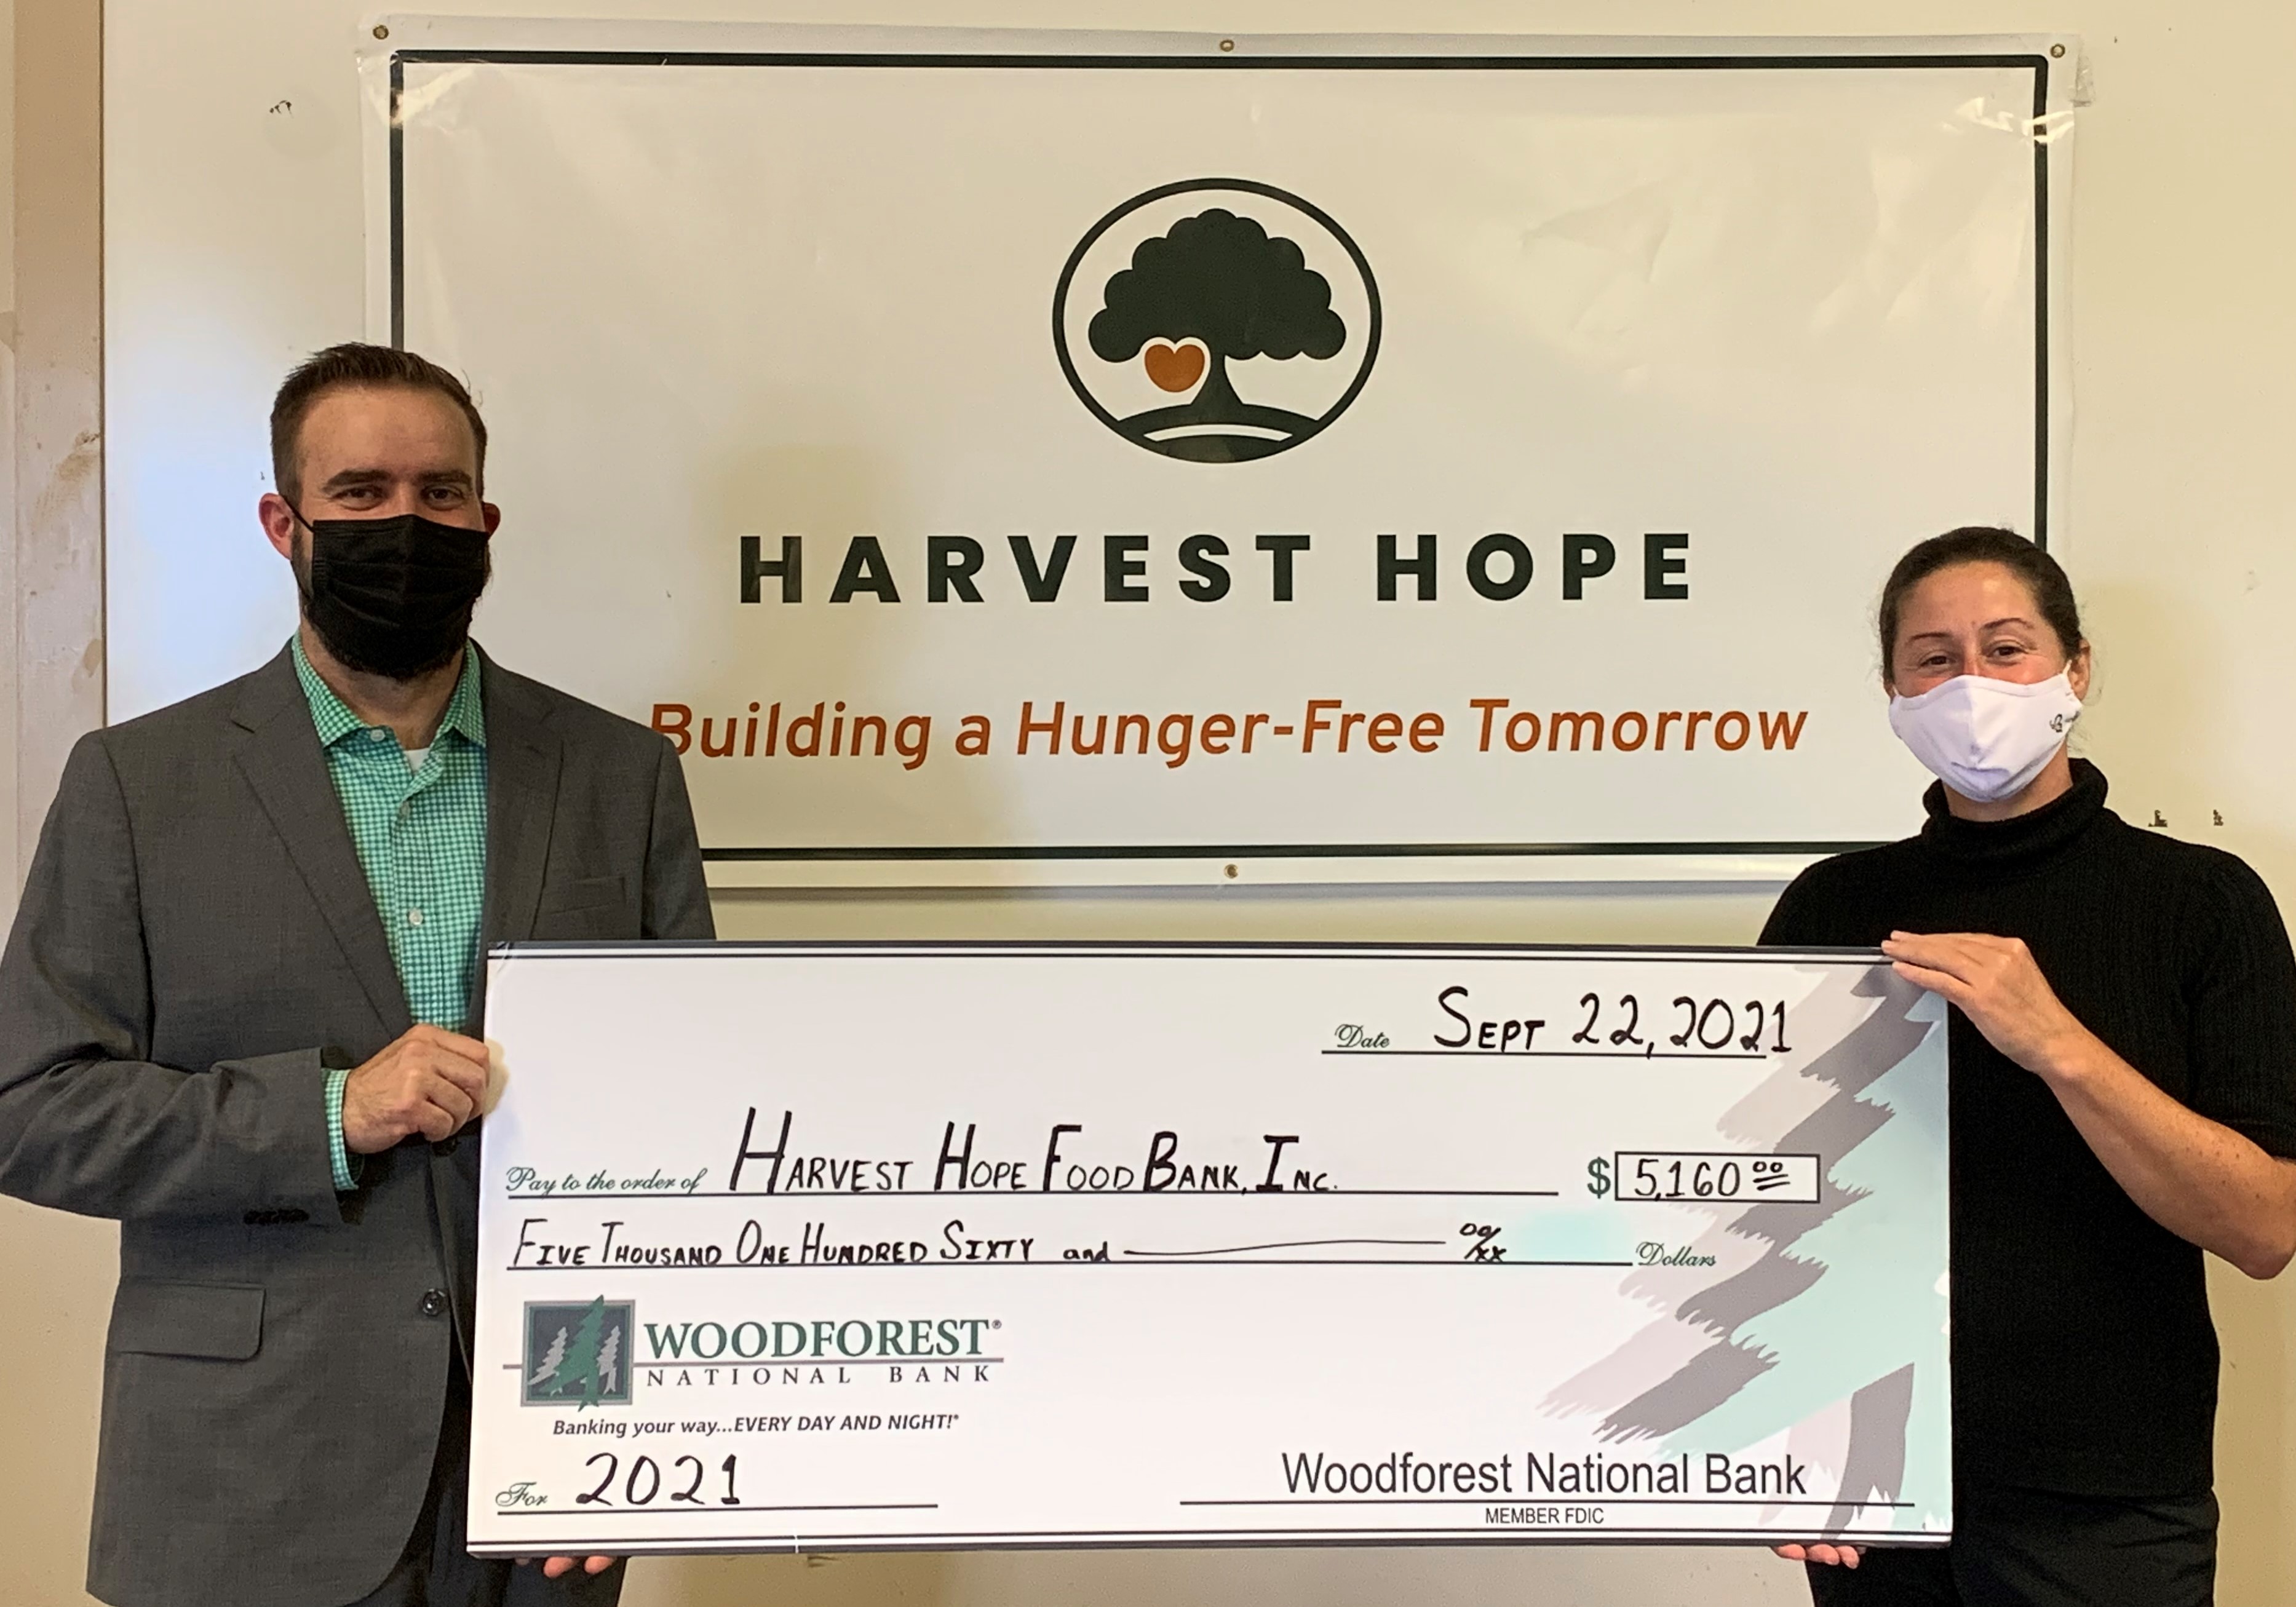 Harvest Hope Food Bank received a $5,160.00 donation from WCF.